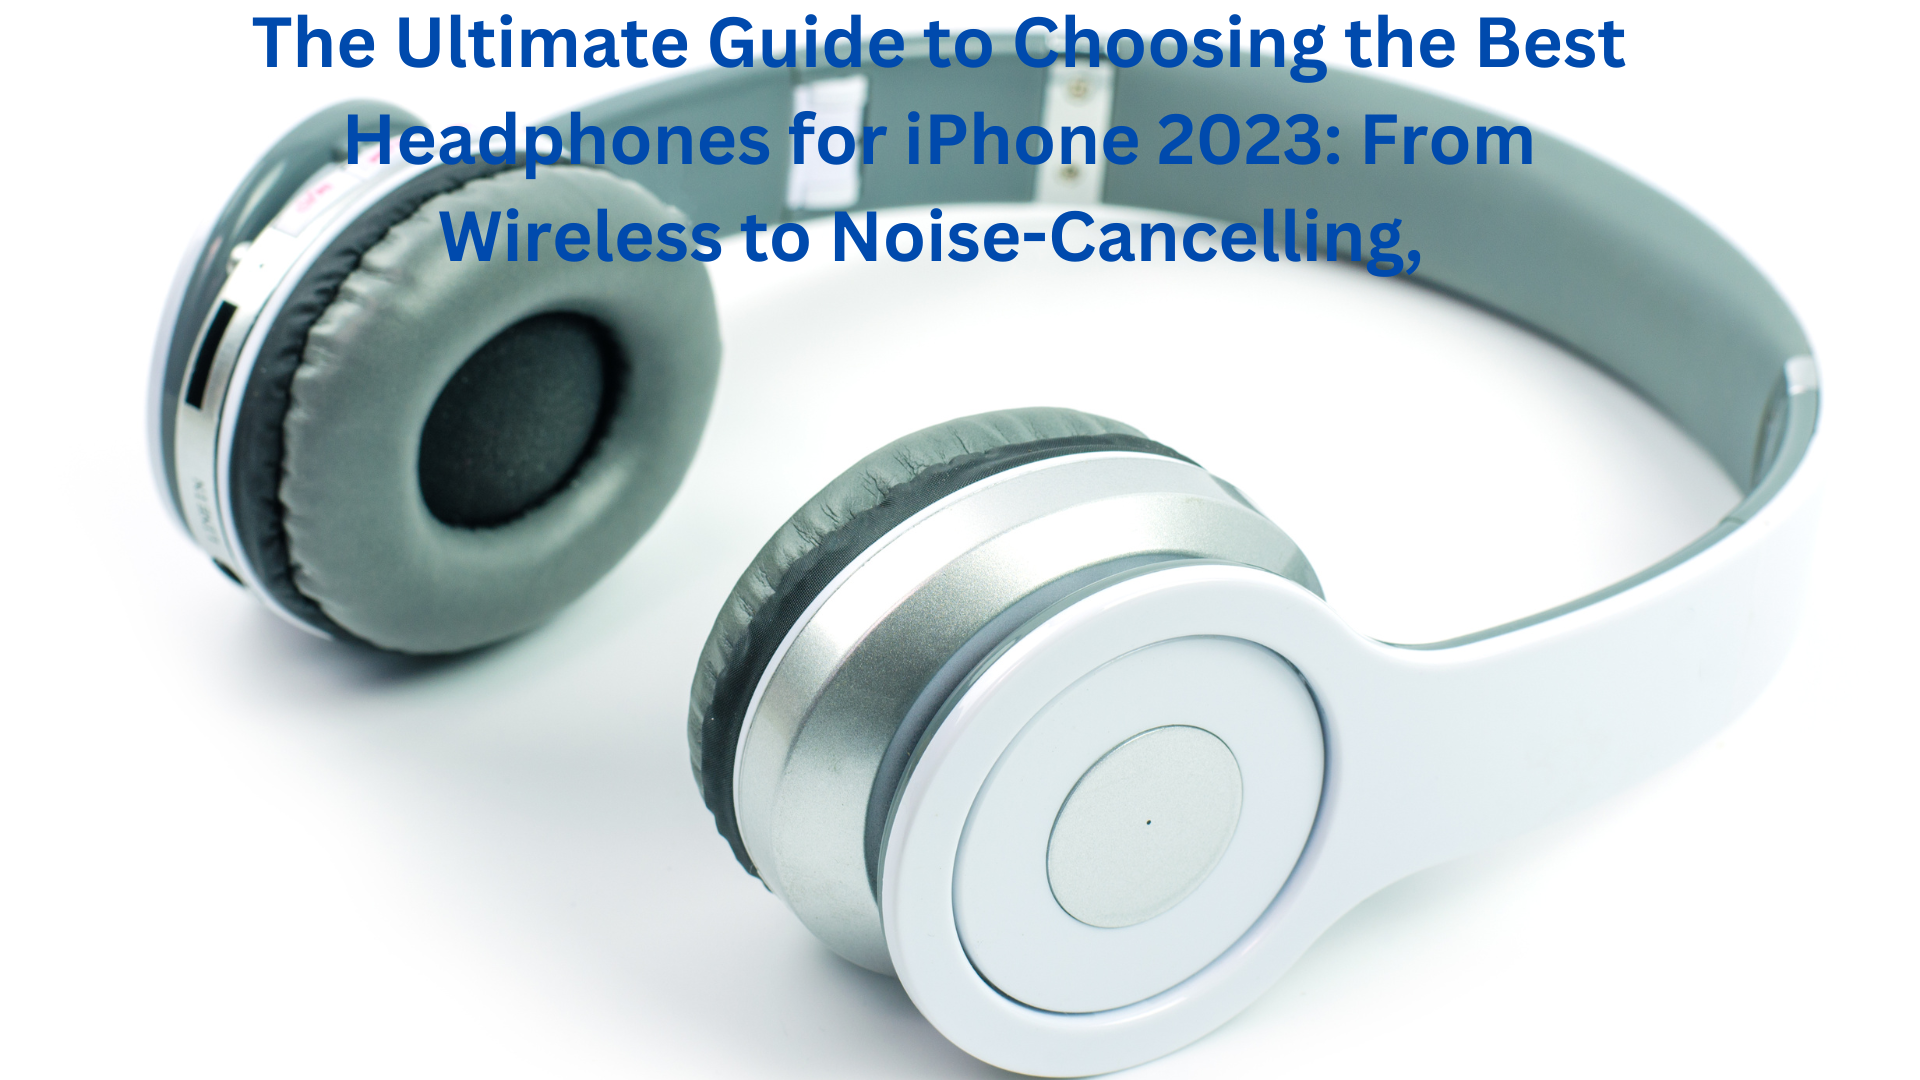 The Ultimate Guide to Choosing the Best Headphones for iPhone 2023 From Wireless to Noise Cancelling